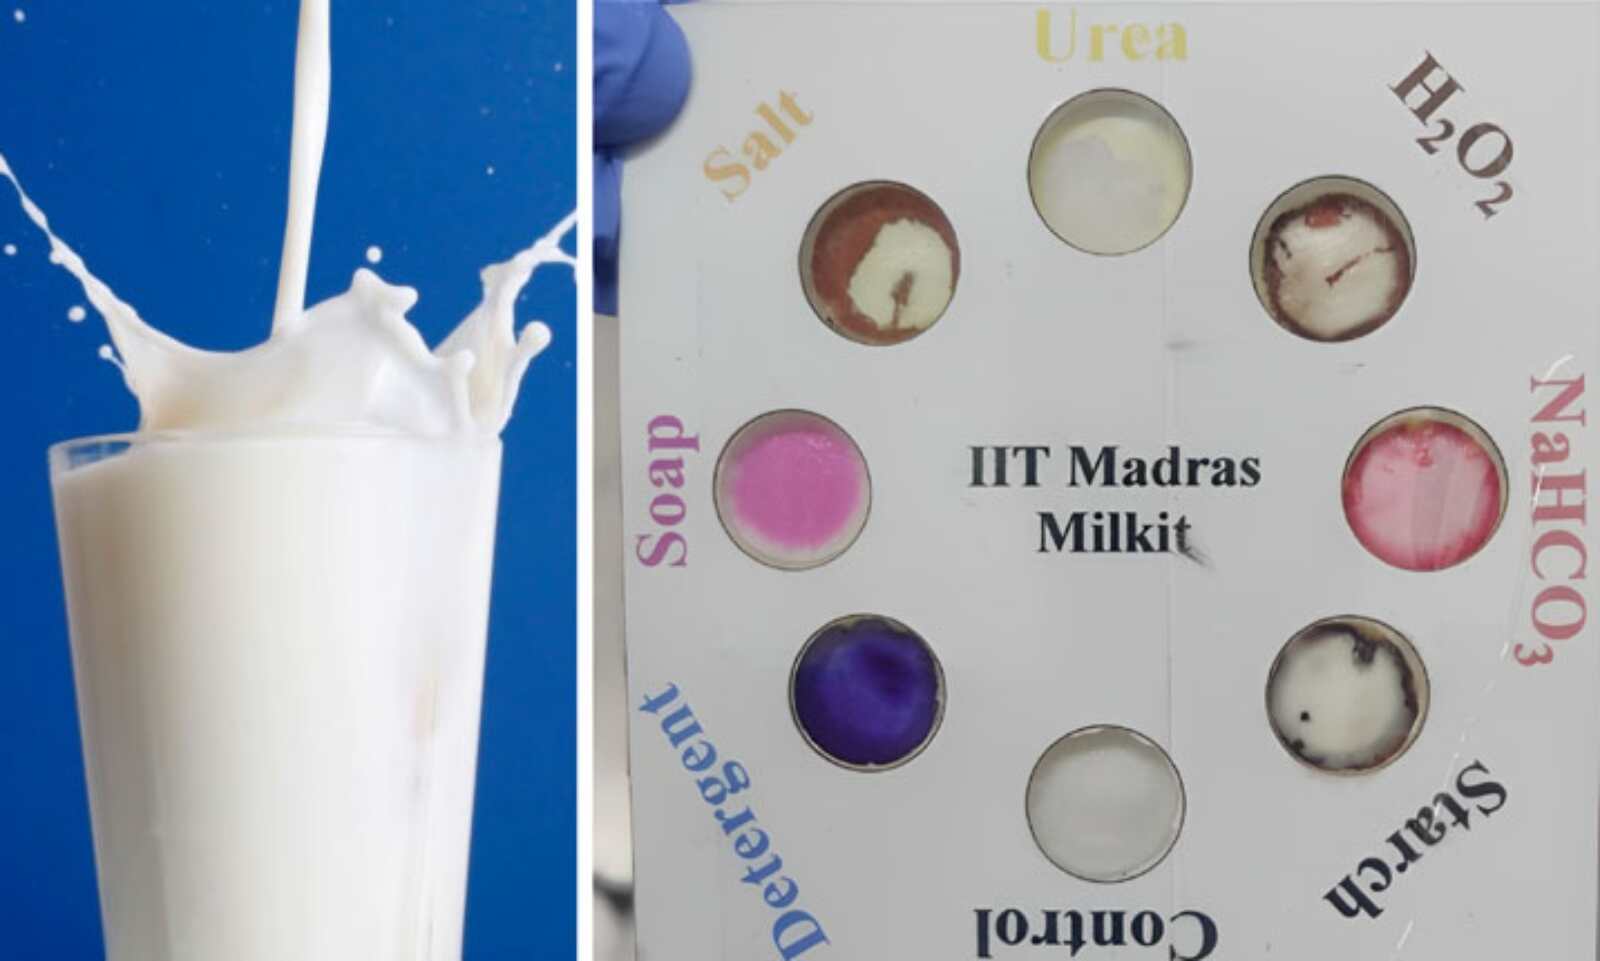 IIT Madras researchers develop pocket-friendly device to detect adulteration in milk_50.1